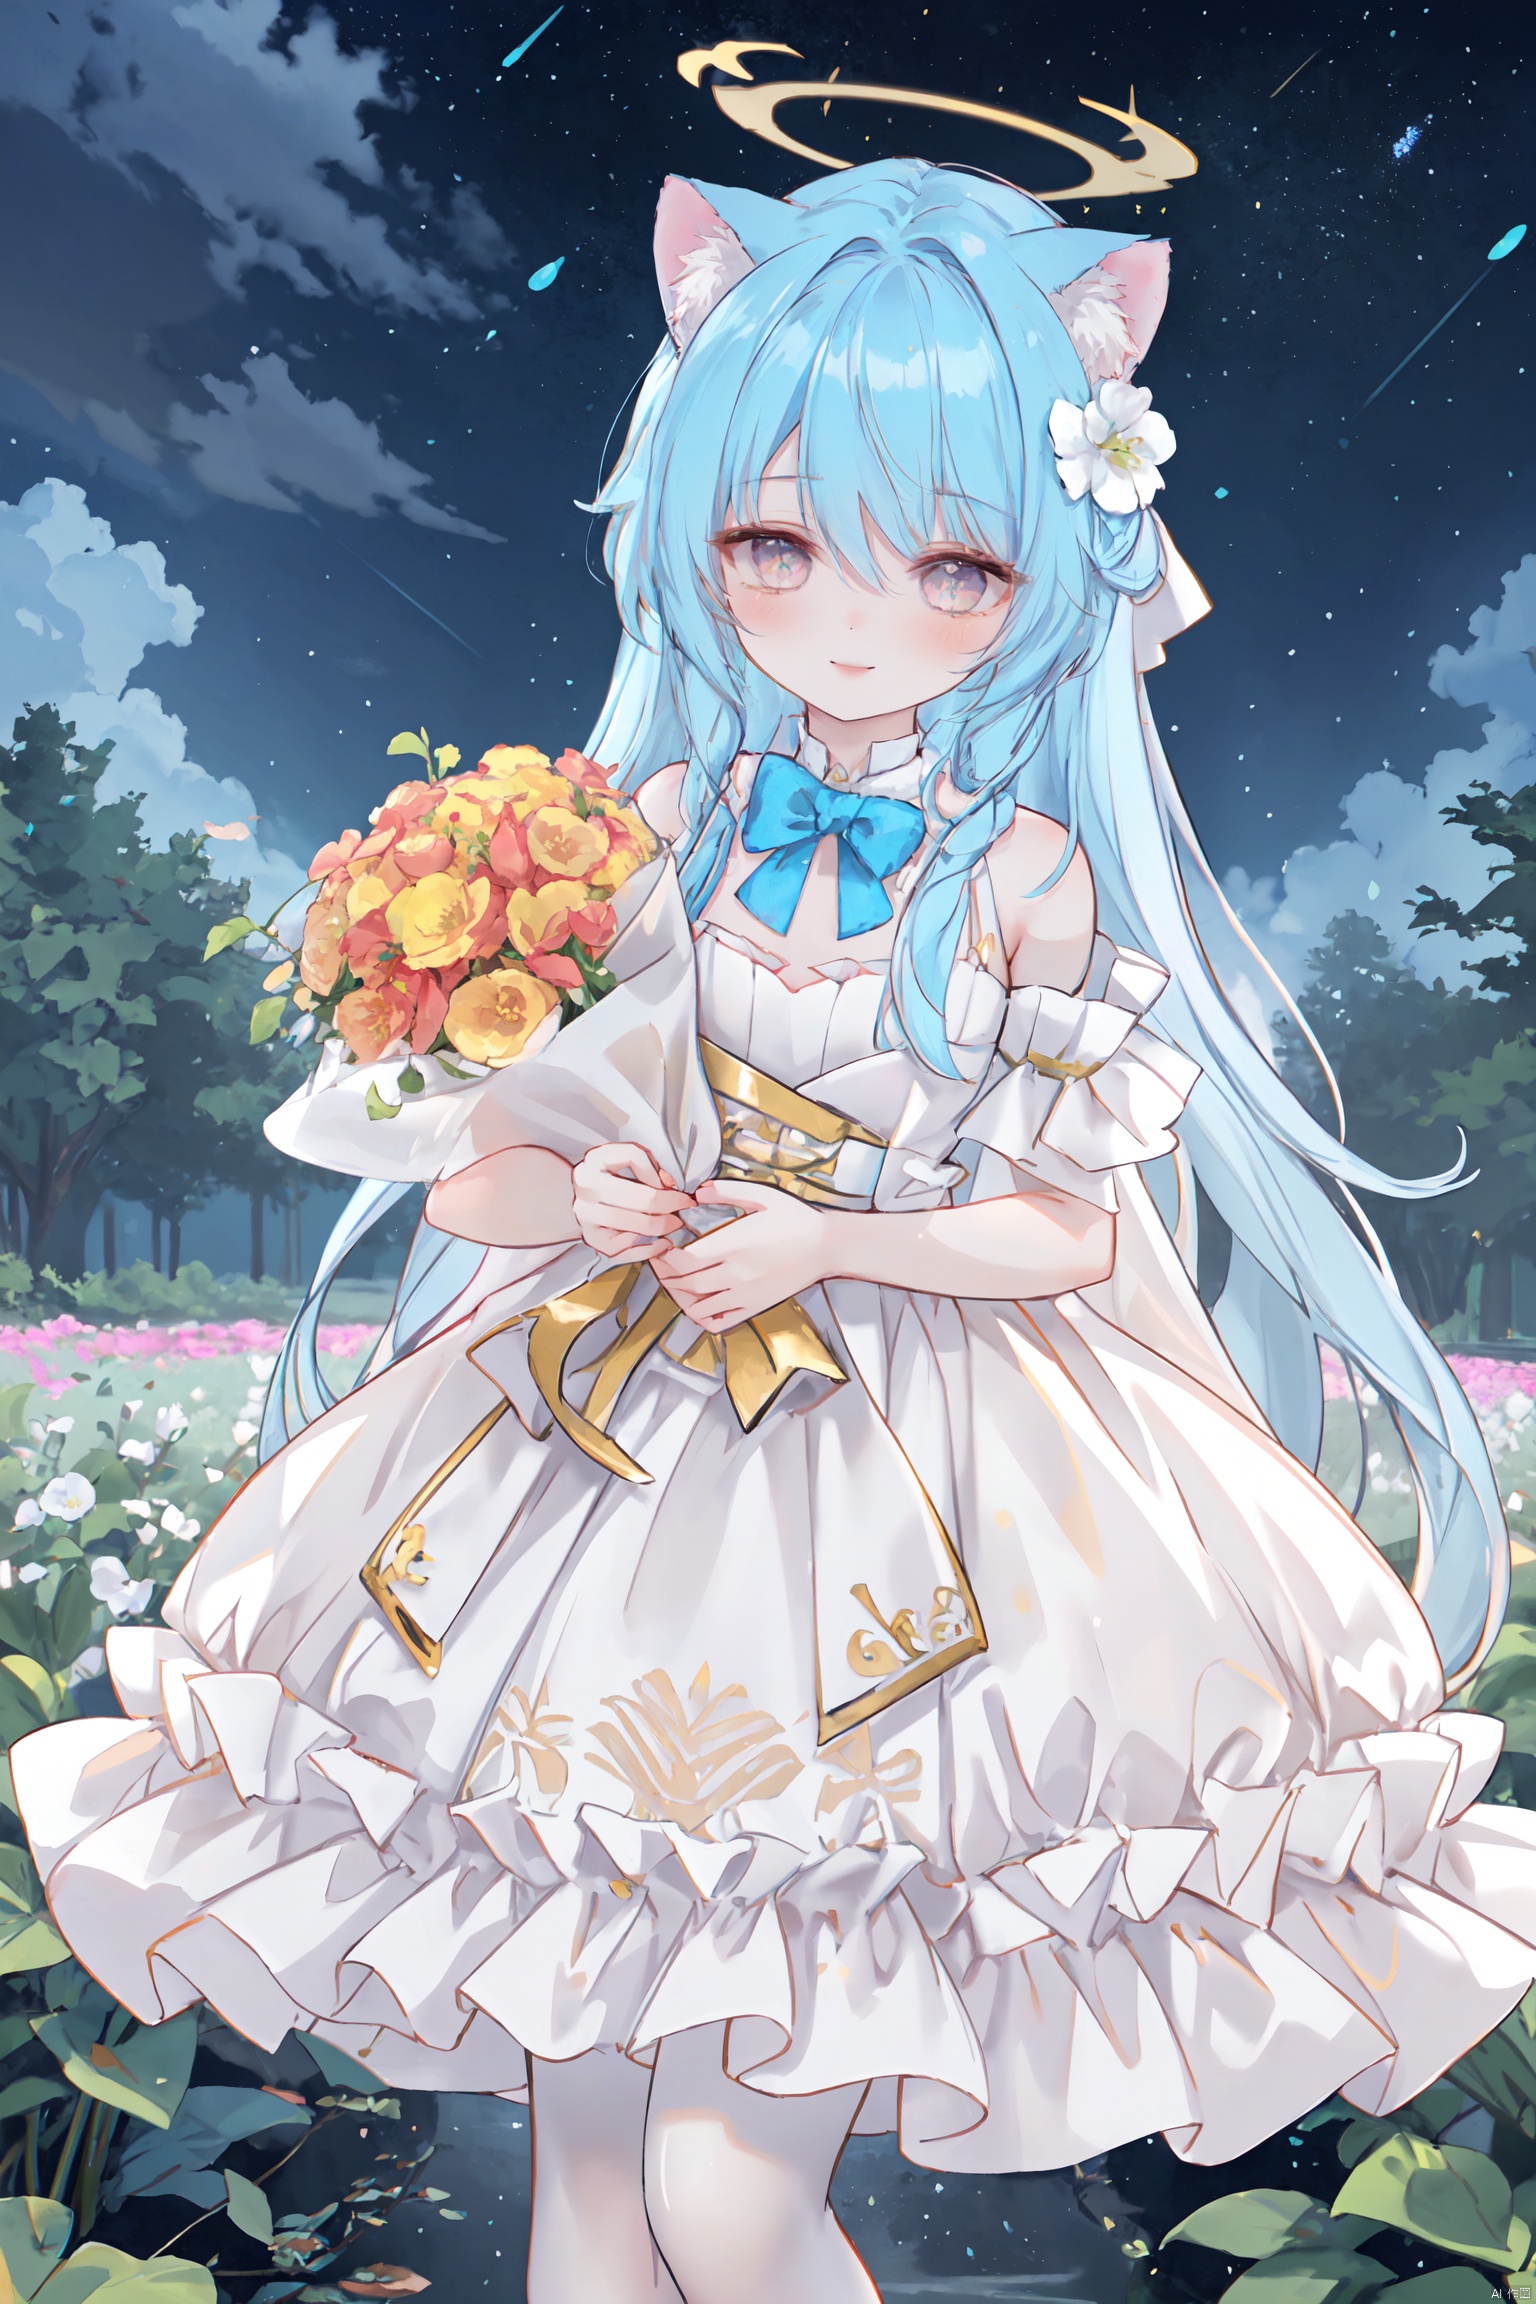 masterpiece, best quality, masterpiece,best quality,official art,extremely detailed CG unity 8k wallpaper, in spring, sun, moon, rain, sky, beautiful detailed sky, beautiful detailed water, flower field, Rivers, stars, endless flowers, a big tree, in the middle, under a big tree, a girl,long hair, disheveled hair, Blue hair, Gradient, white,Inclined bangs,bow tie,Eyes, green, gradient, gold, beautiful detail eyes, sparkling eyes, watery eyes,the White Cat Ears,Smile up to the sky, hold a bouquet,chest, medium chest, gown, with floral pattern, white, gradient, light pink, pleated skirt, white, white stockings, board shoes,(three-dimensional), (layering), (picture), garland, light rays, flowers, BY MOONCRYPTOWOW,HALO